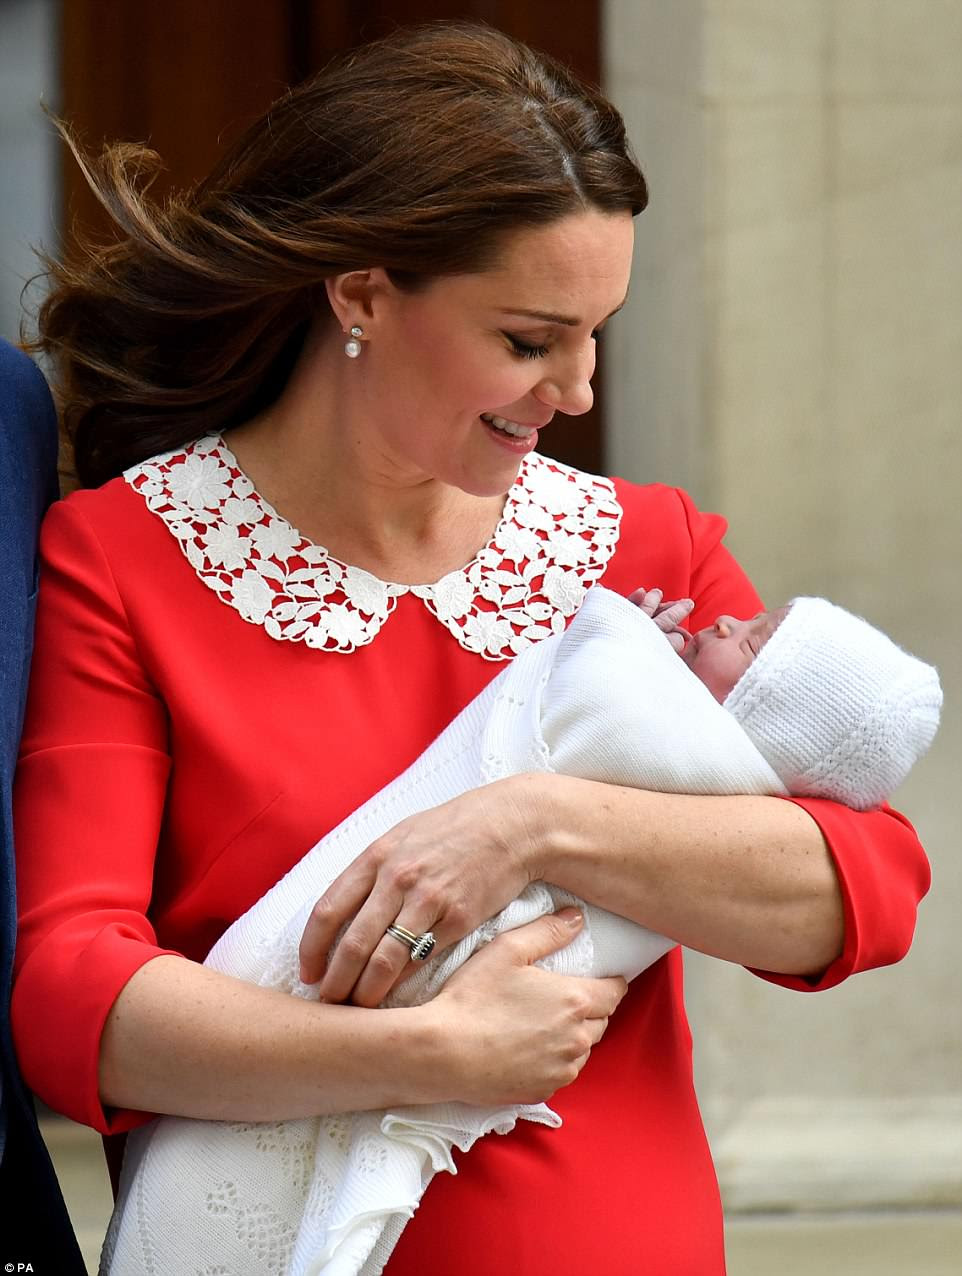 The Duchess of Cambridge gave birth to her new son at 11.01am after going into birth around 6am, to which Prince William joked: 'We didnÂ¿t keep you waiting too long this time'